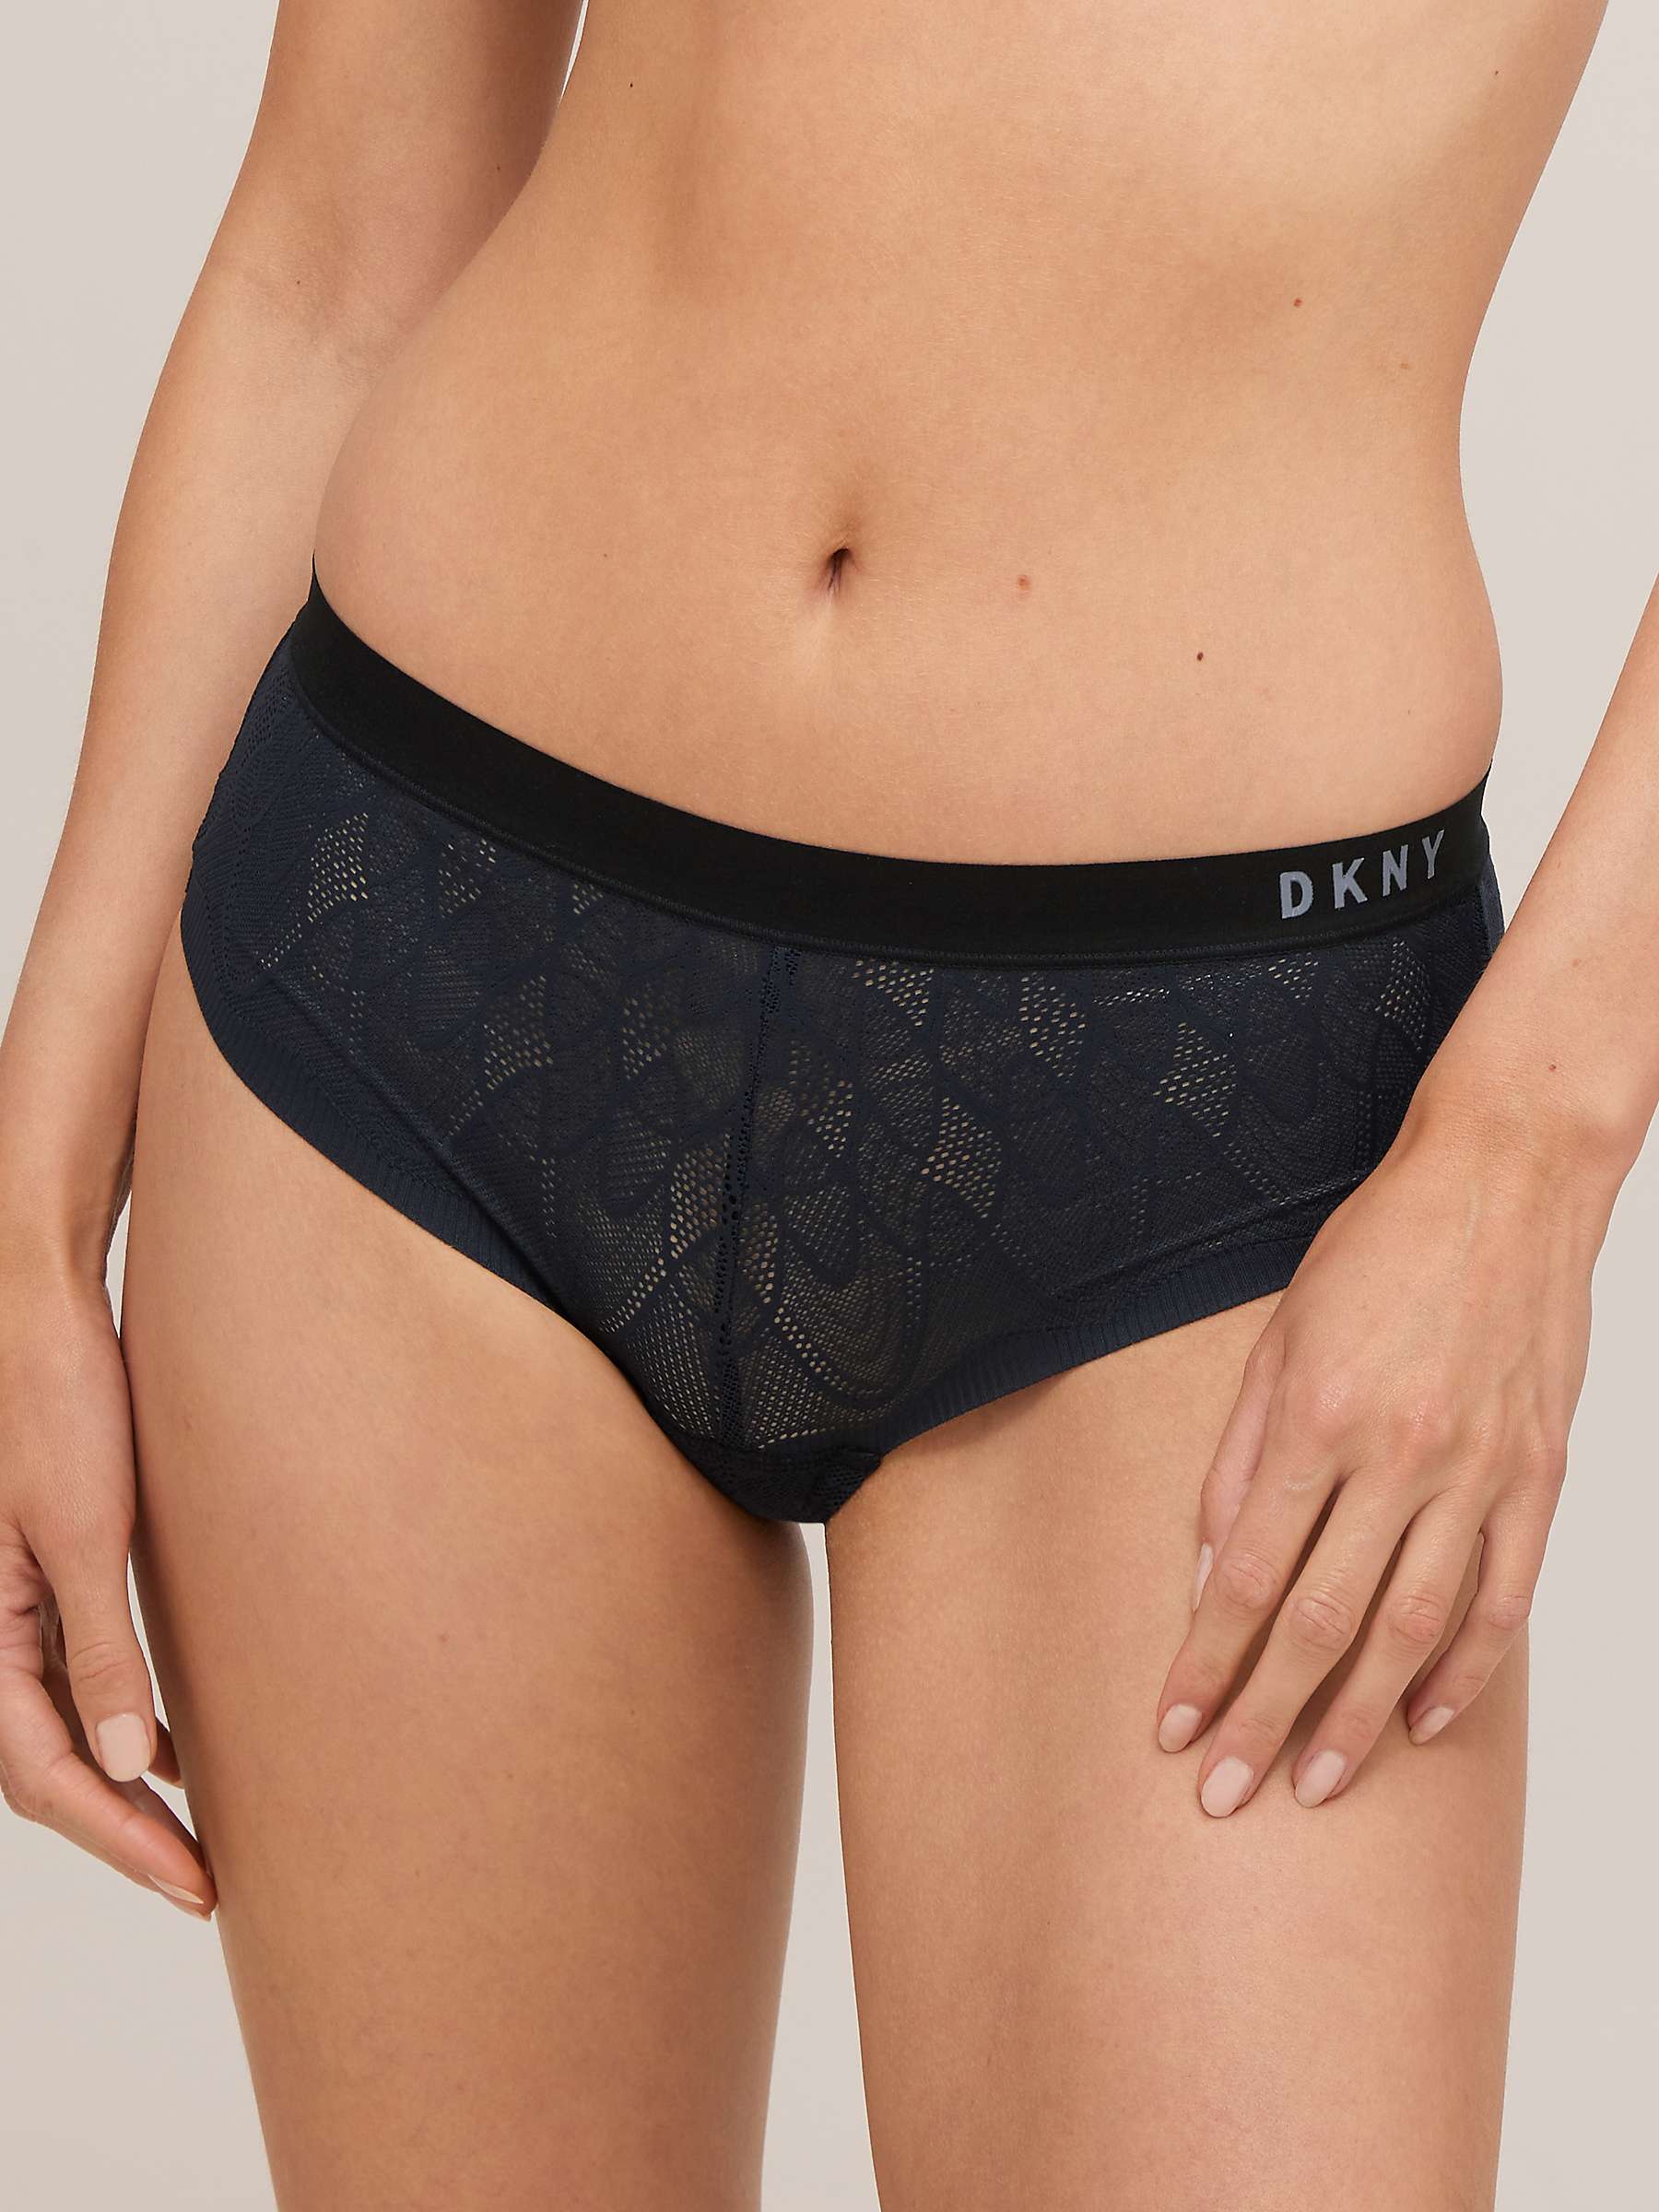 Buy DKNY Lace Comfort Hipster Knickers Online at johnlewis.com